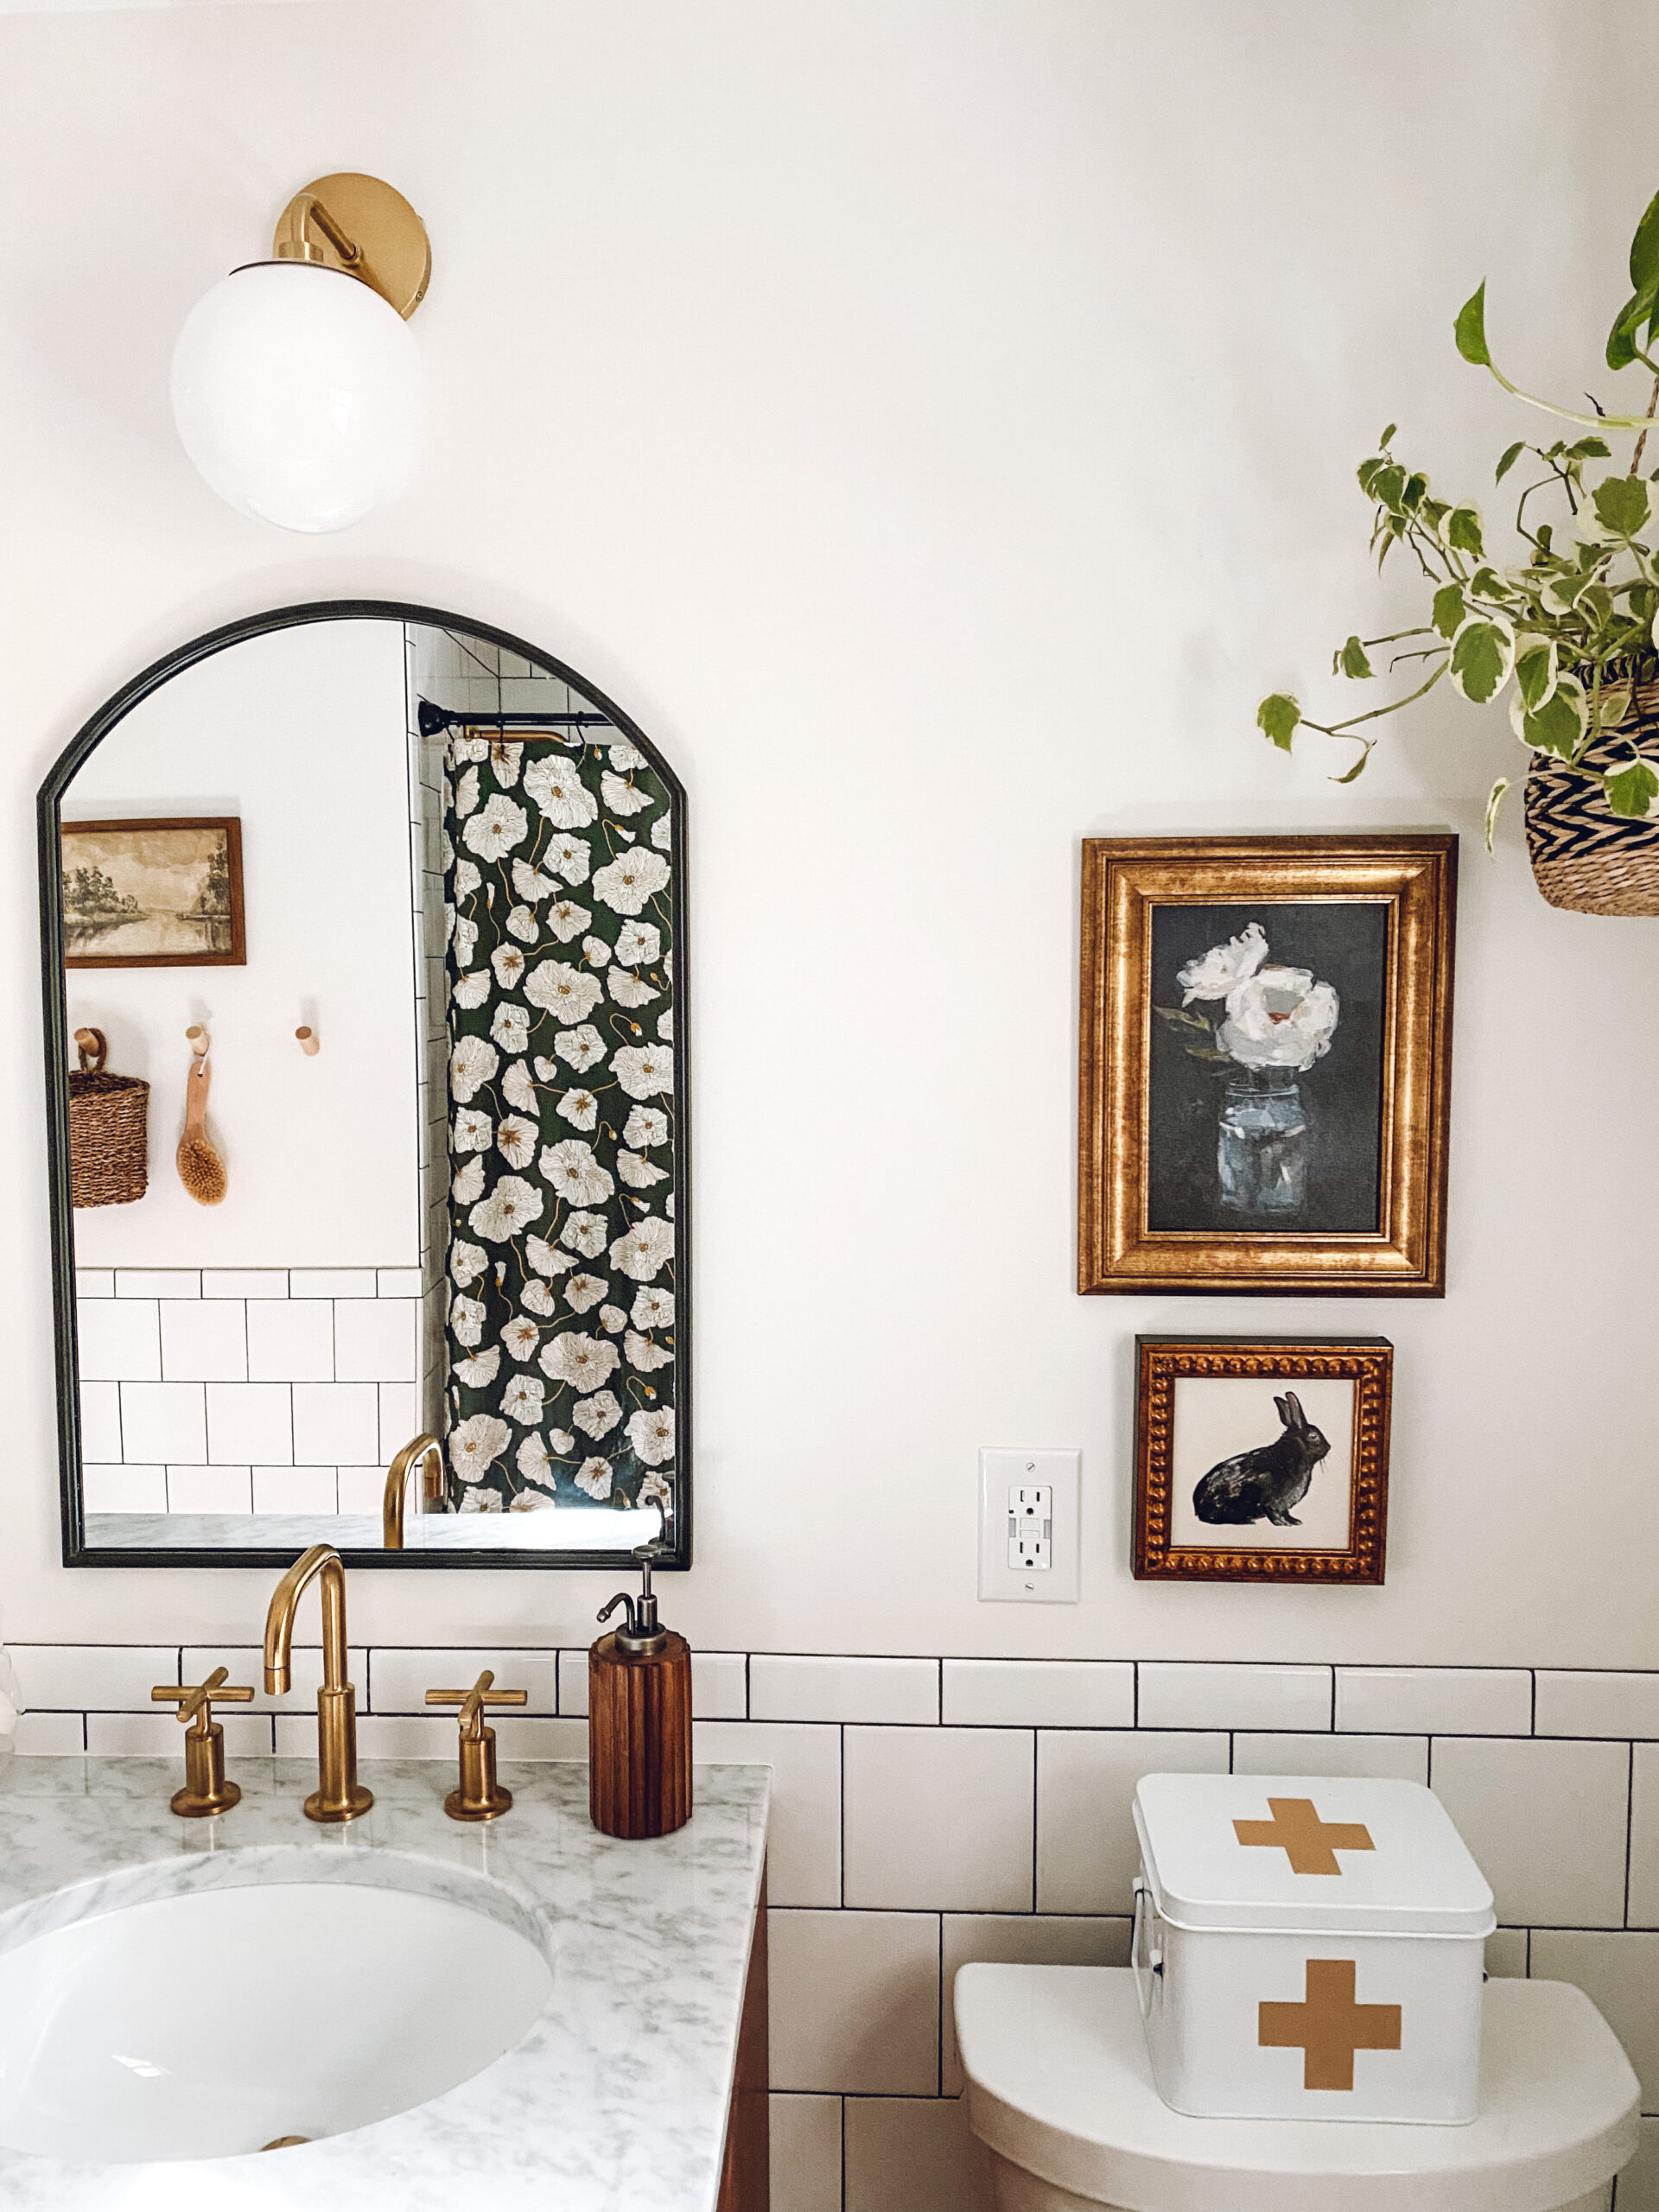 I saved on some of the art and splurged on one. How much did this whole bathroom remodel cost?